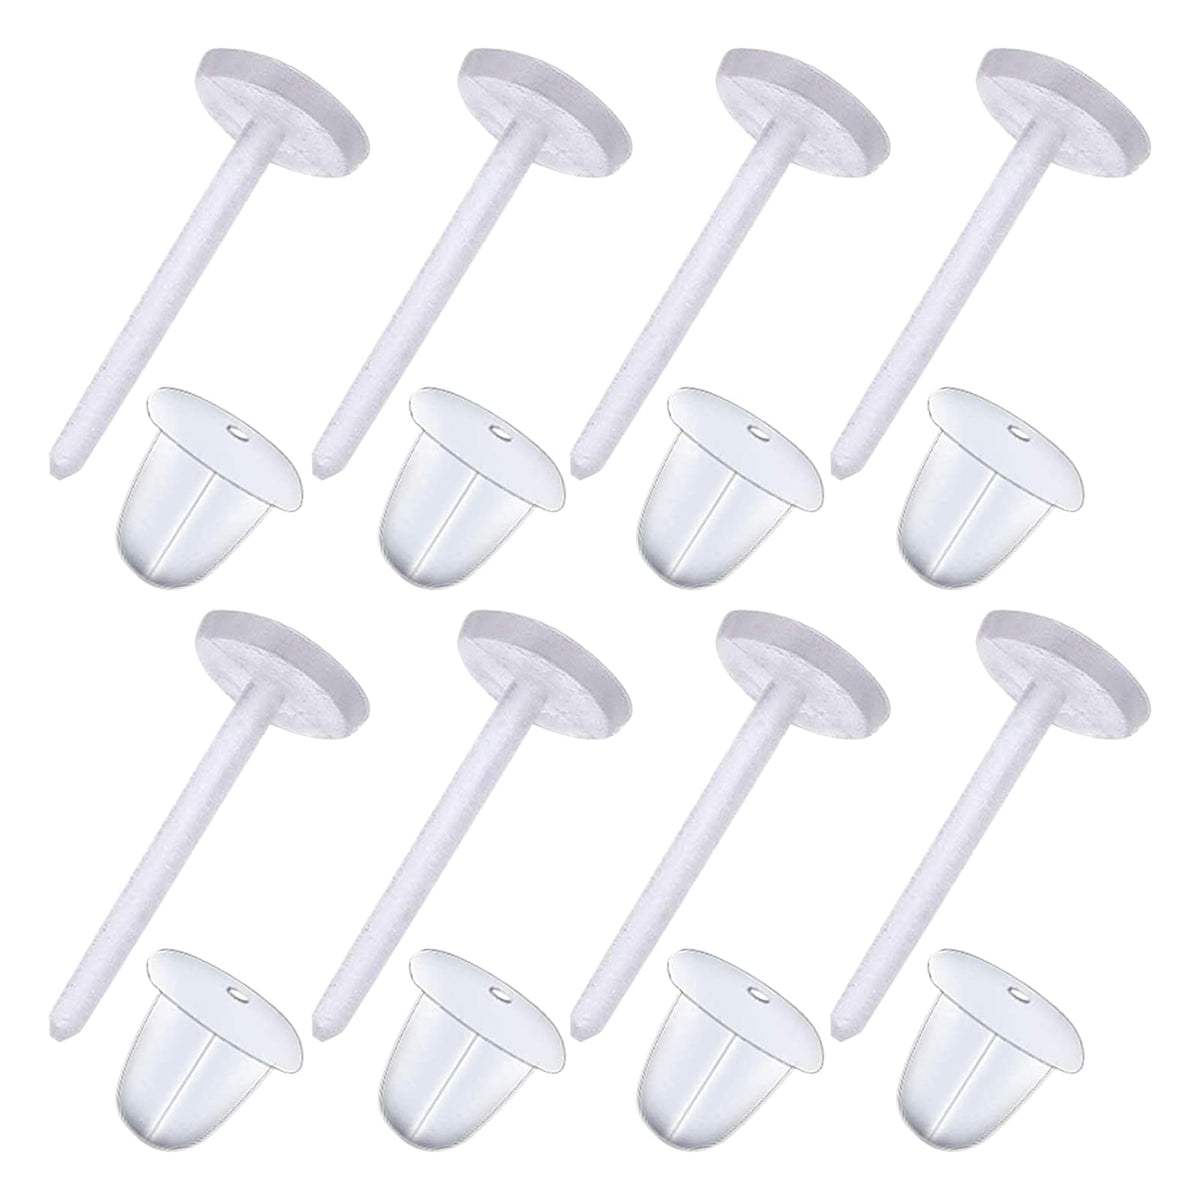 RUTZ® Clear Earrings, 100pcs Earring Retainers, Safety Backs Rubber Stoppers (50 Pairs)